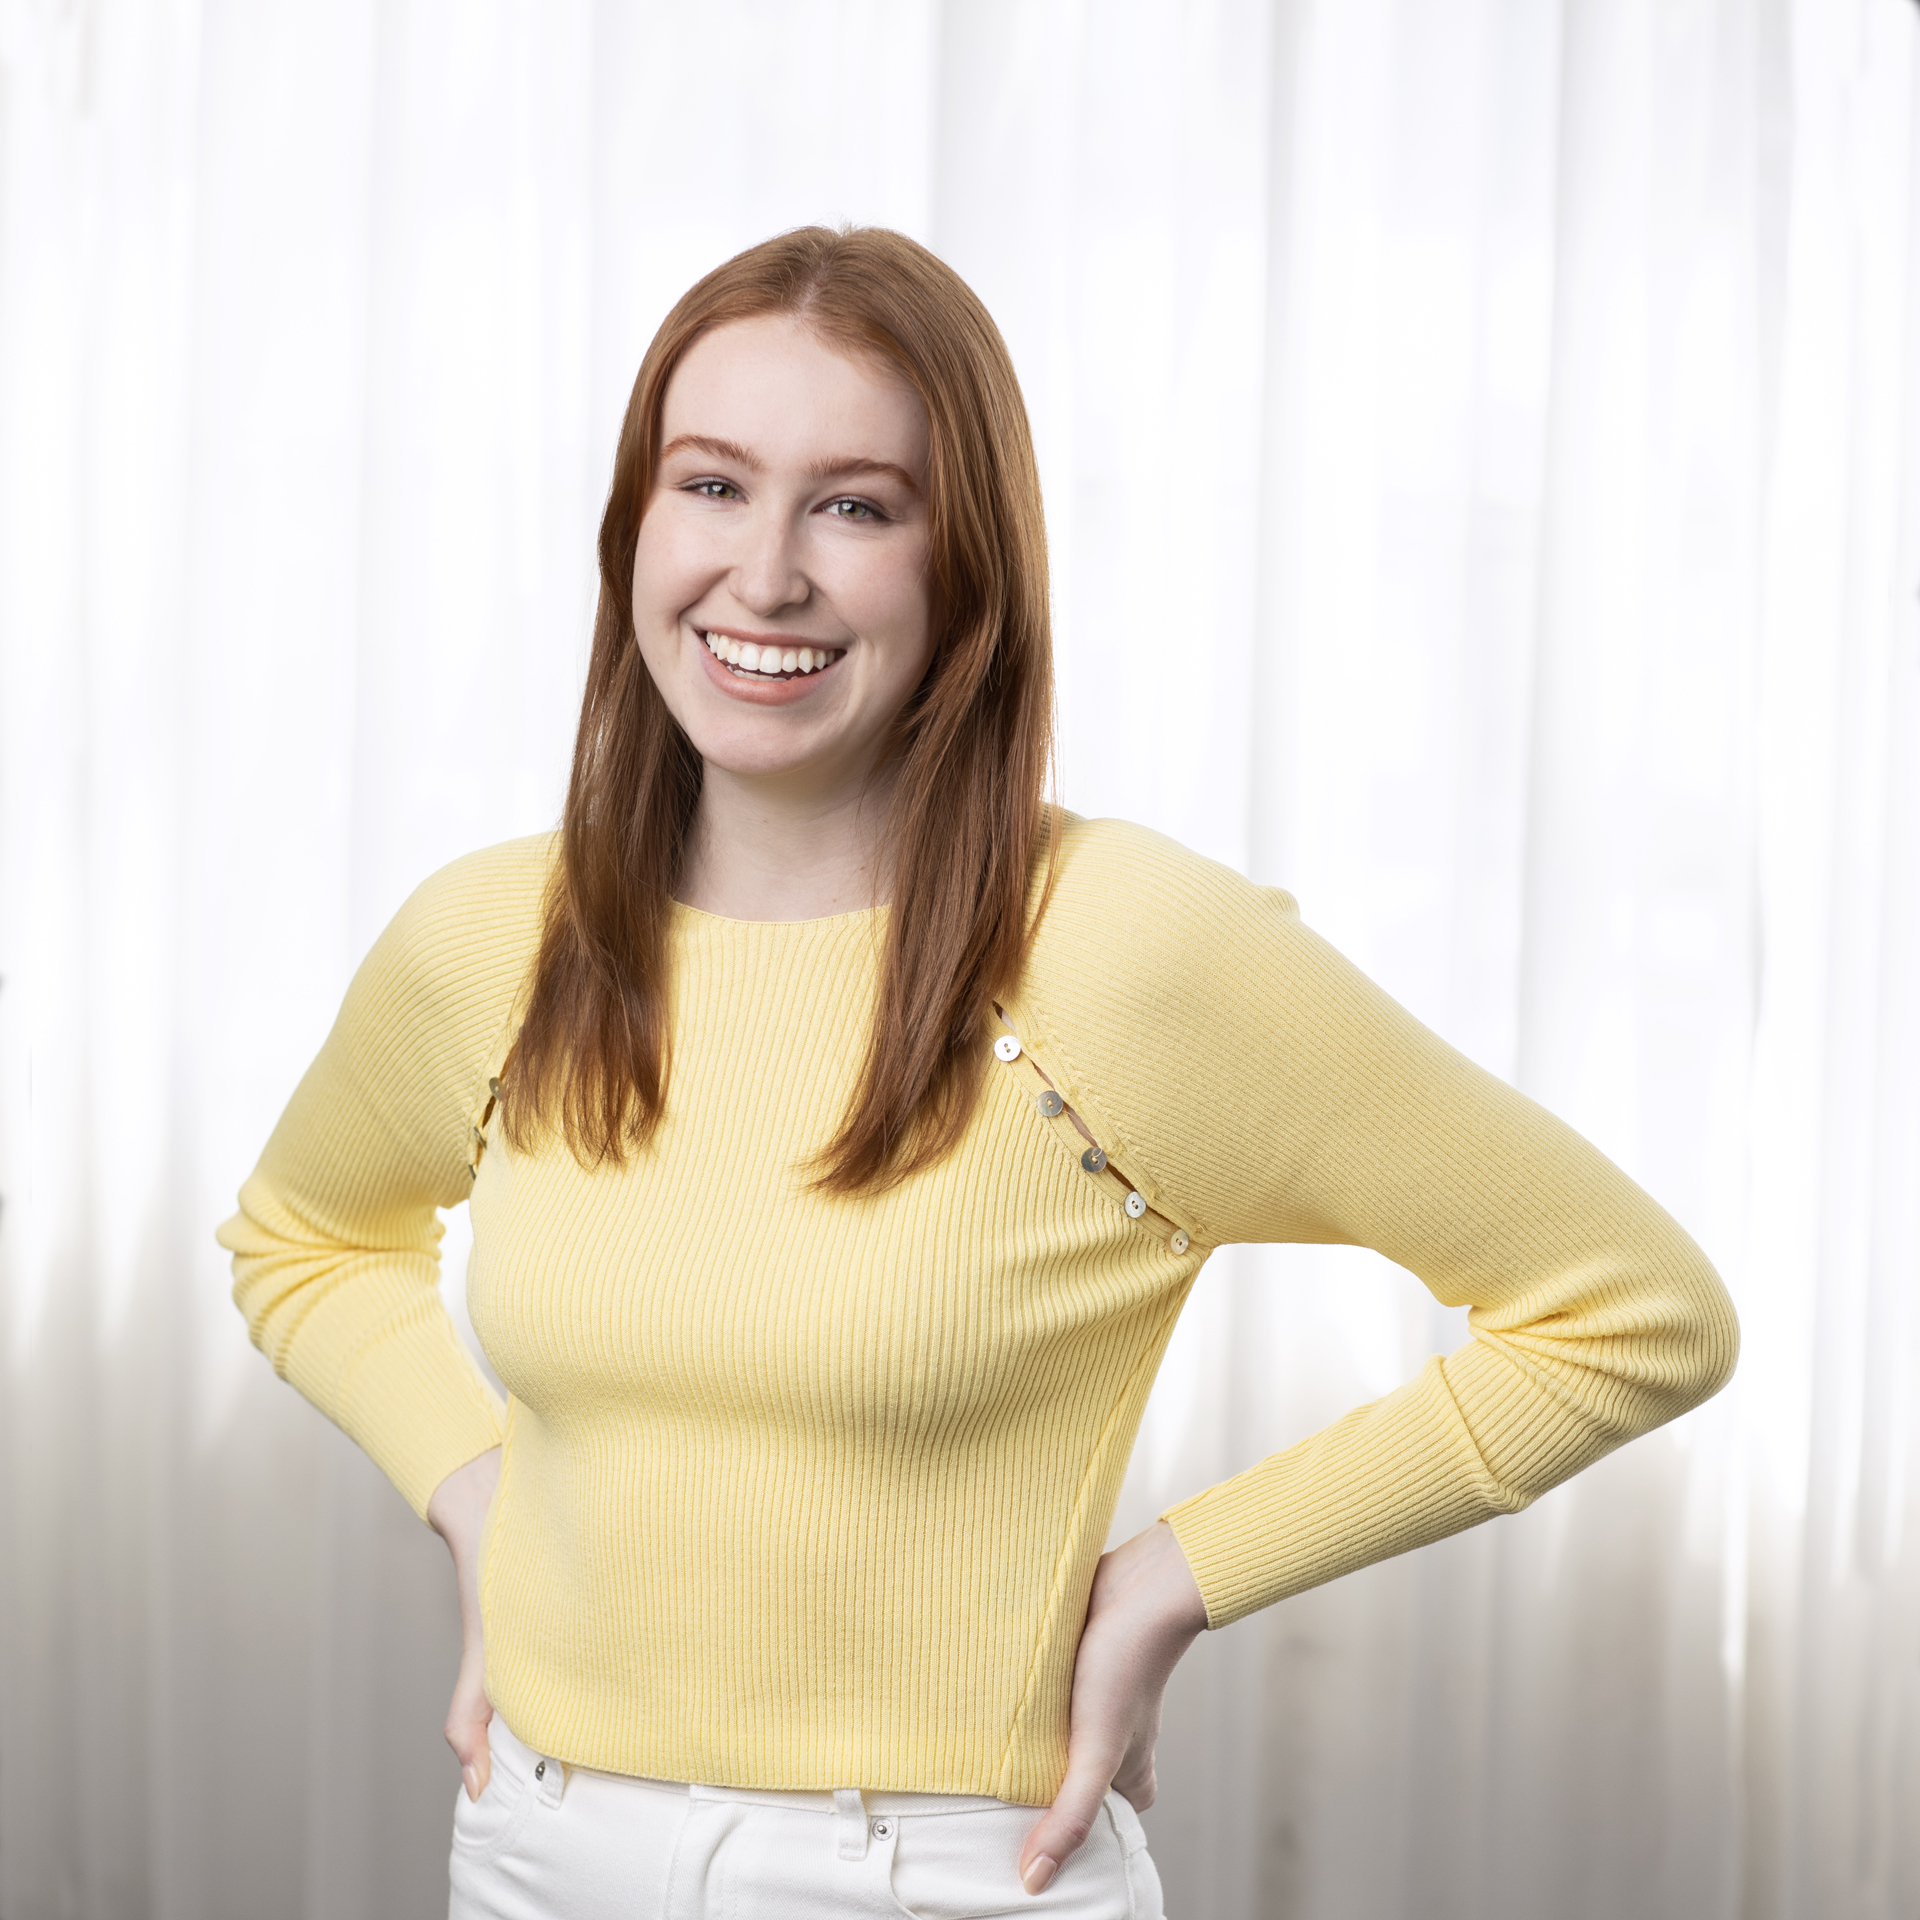 Personal branding portrait of a red headed lady dressed in yellow